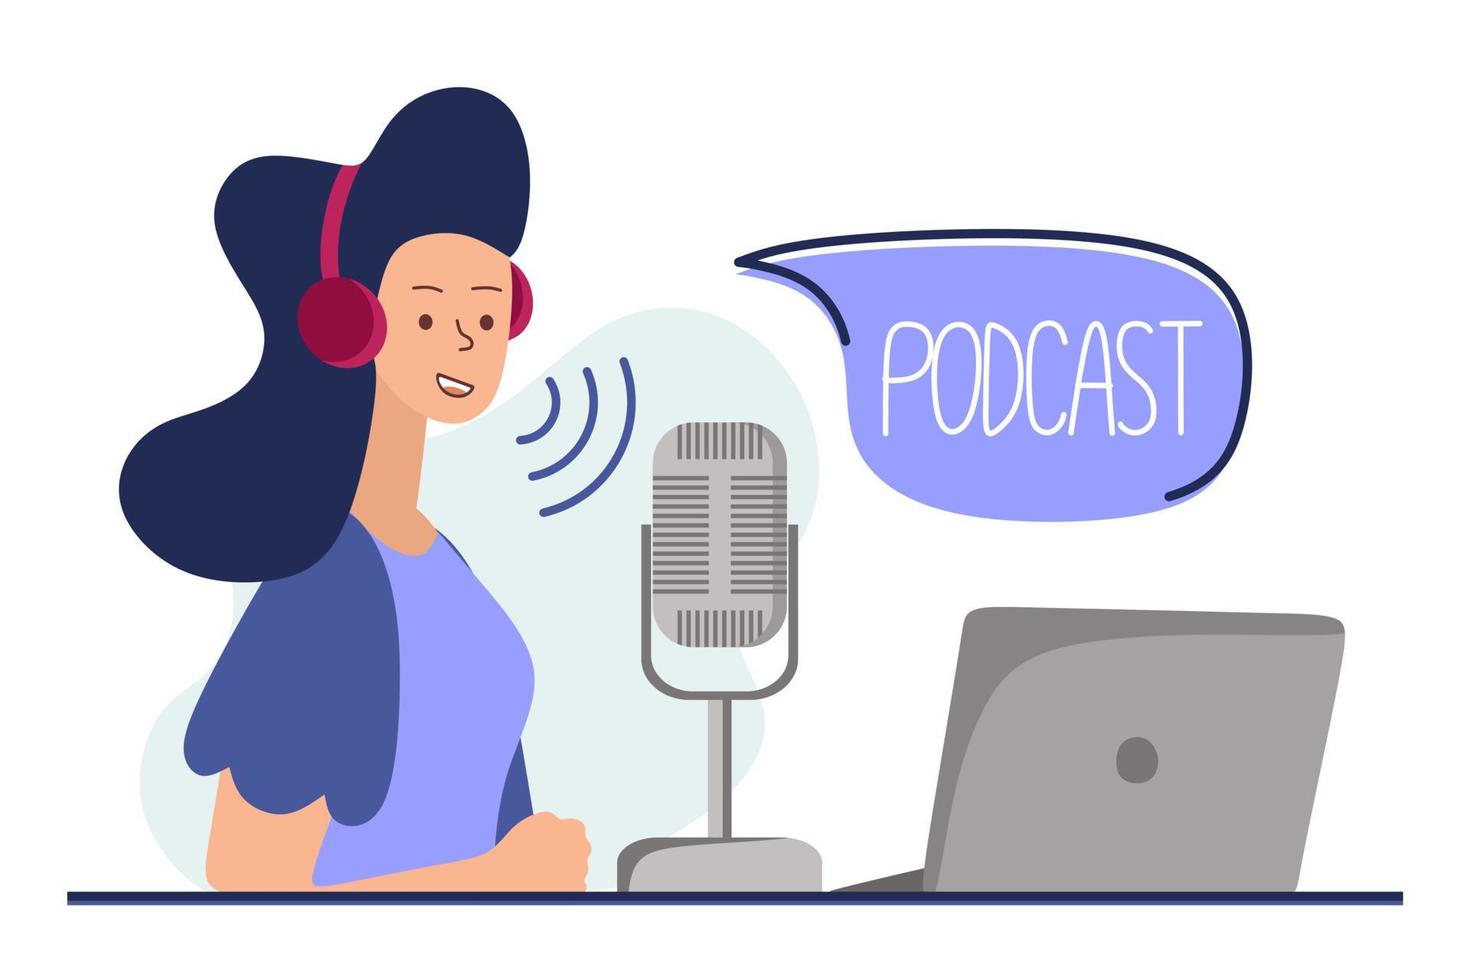 Podcast concept. An illustration about the podcast. A girl talking into a microphone and sitting at a table. Flat vector in a fashionable style.